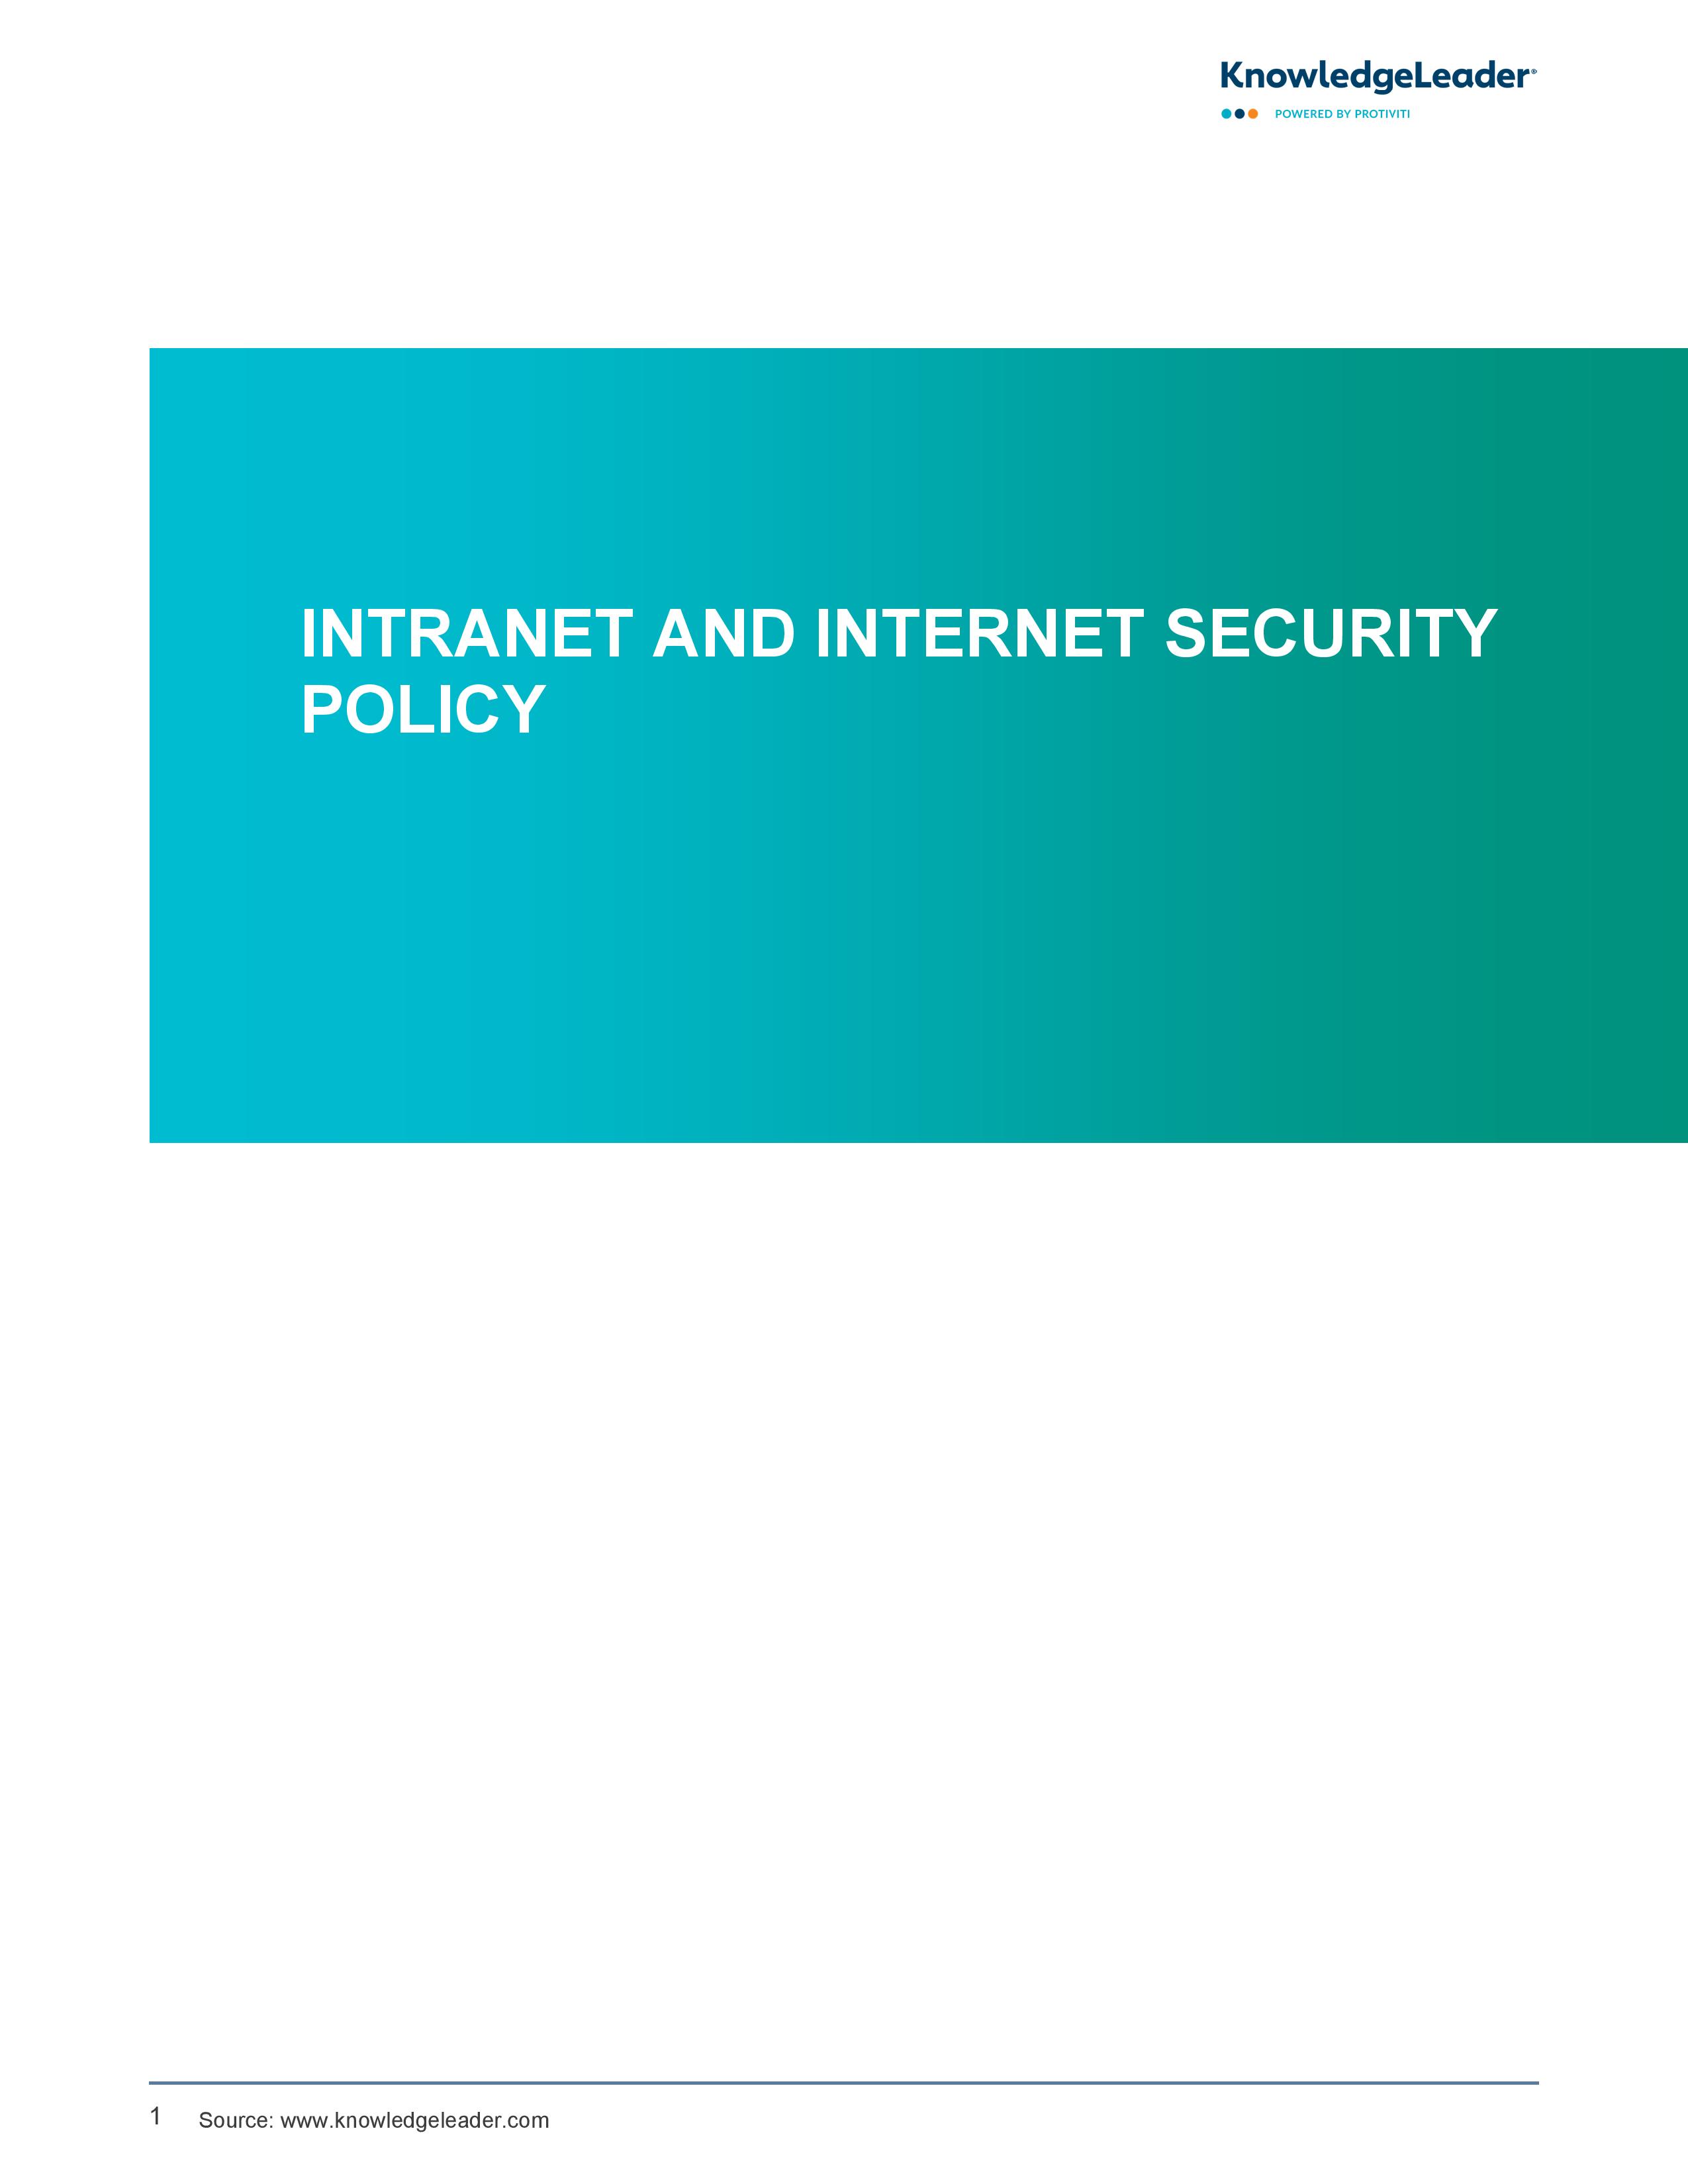 screenshot of the first page of Intranet and Internet Security Policy